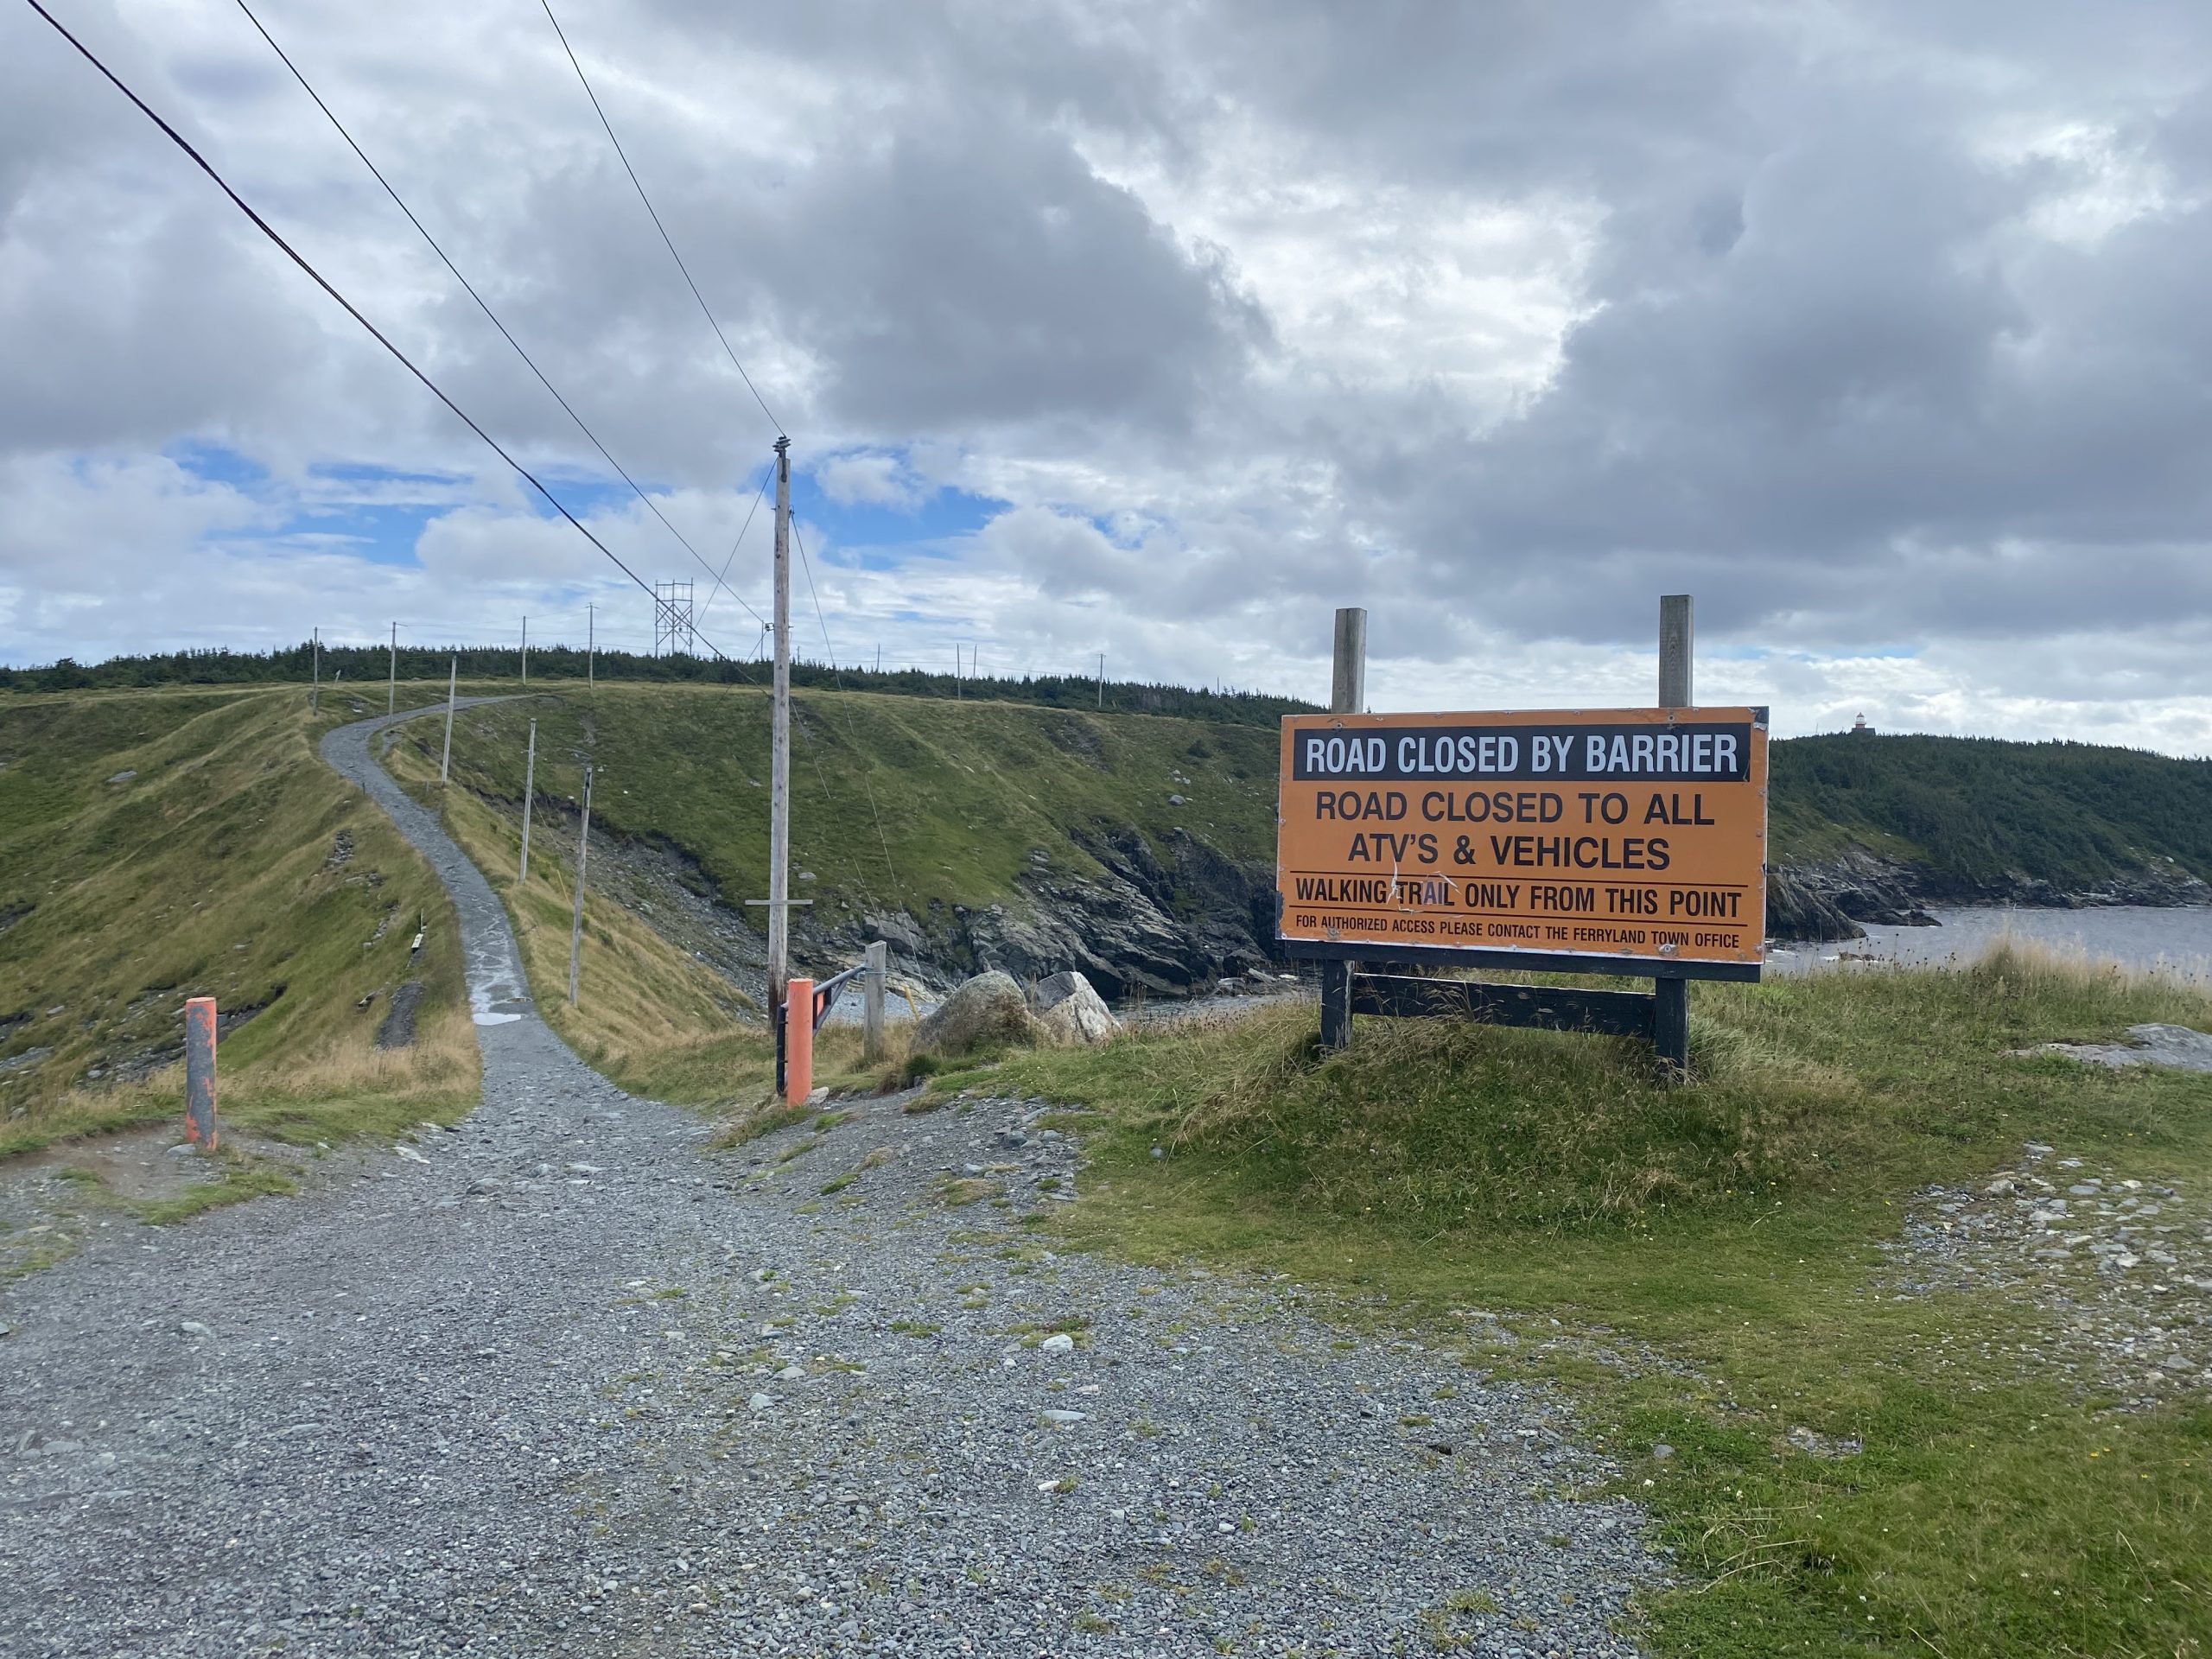 Cars (and motorcycles) aren’t allowed past this point on the way to the Ferryland lighthouse in Newfoundland.